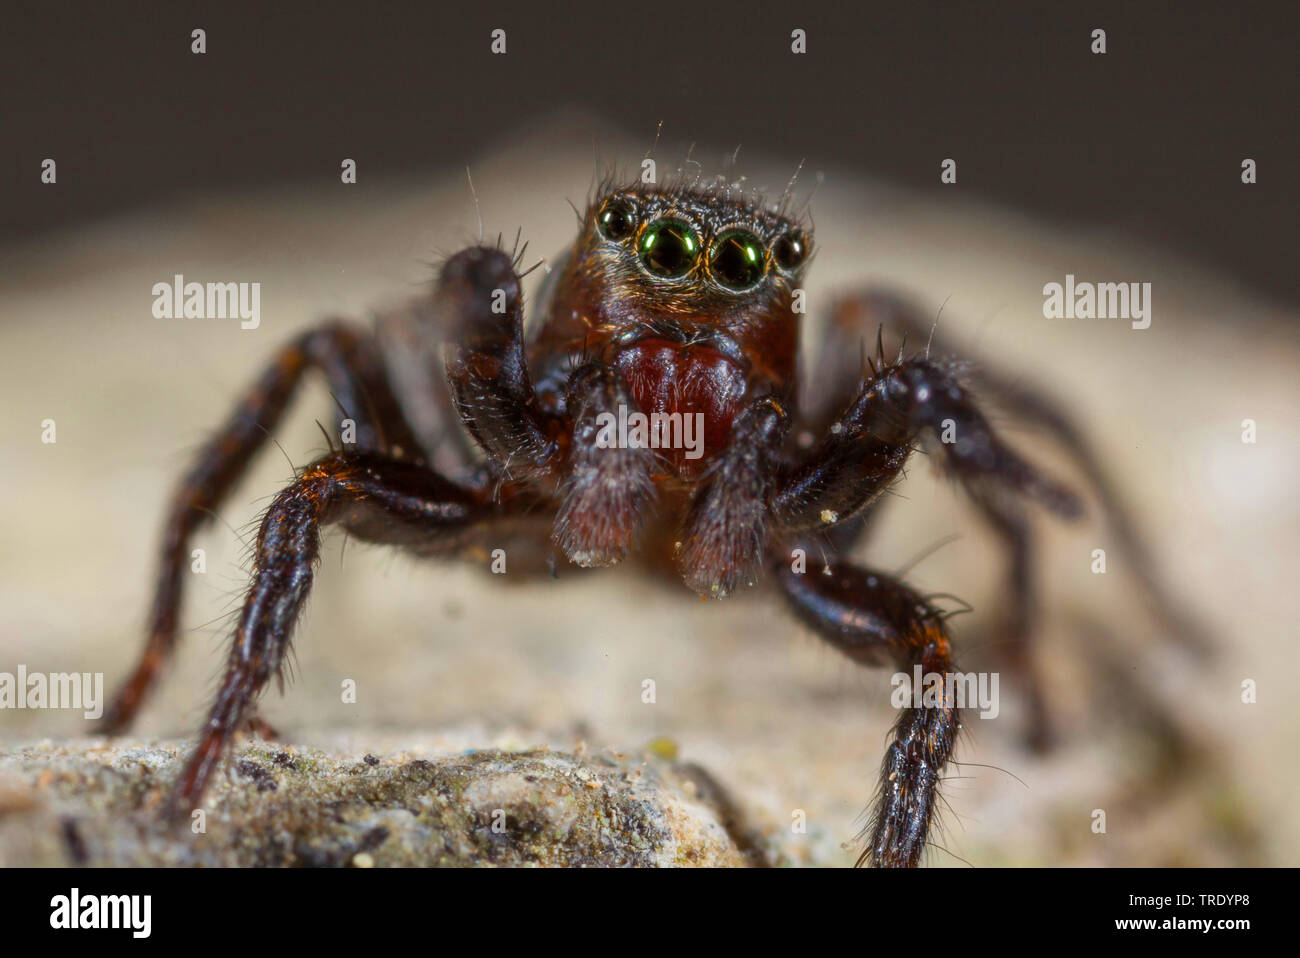 Striped jumping spider (Phlegra fasciata), female, front view, Germany Stock Photo